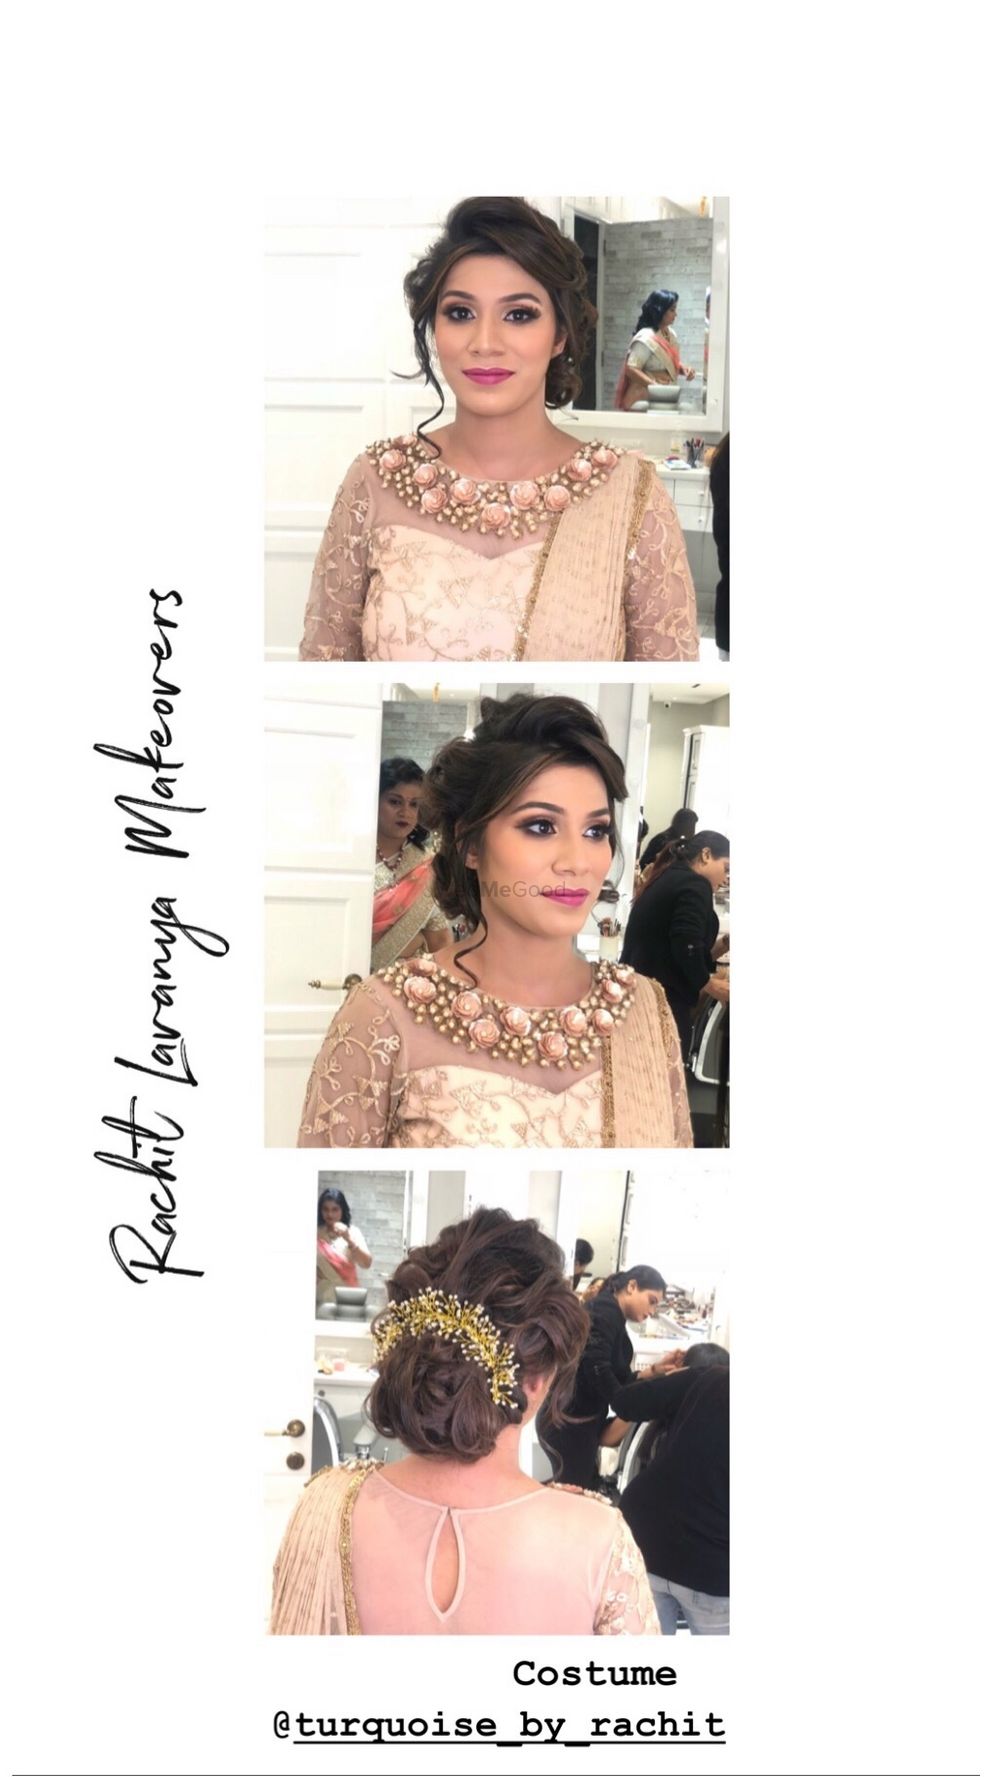 Photo From Highlights - By Rachit Lavanya Makeovers